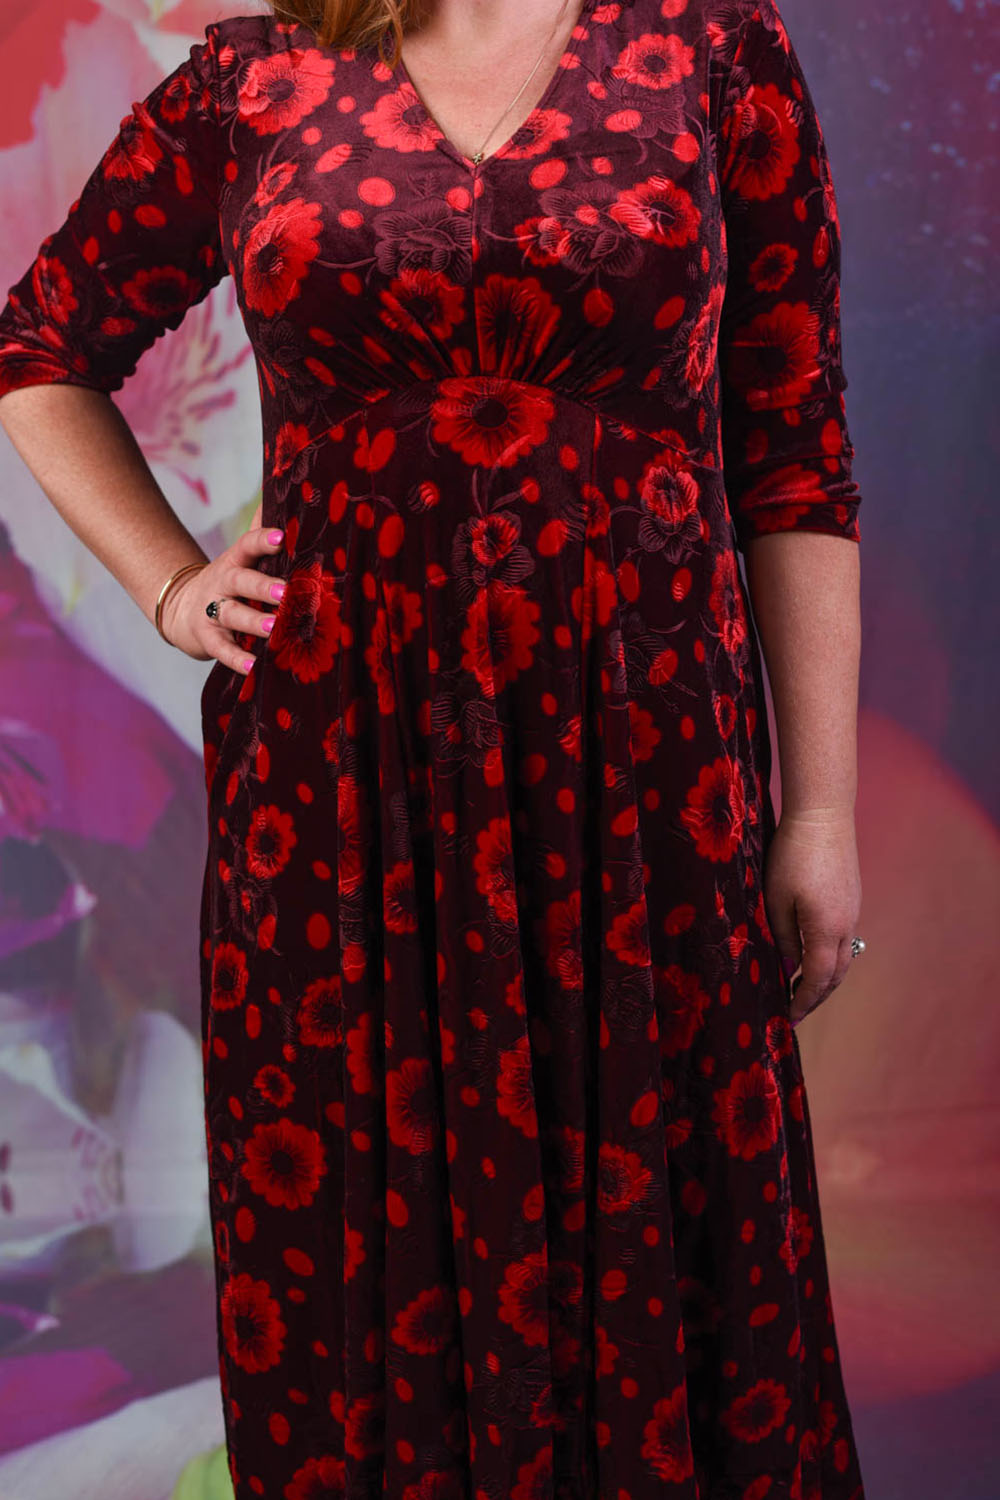 Close-up of the Annah Stretton Veronica Jude Dress in red floral spot